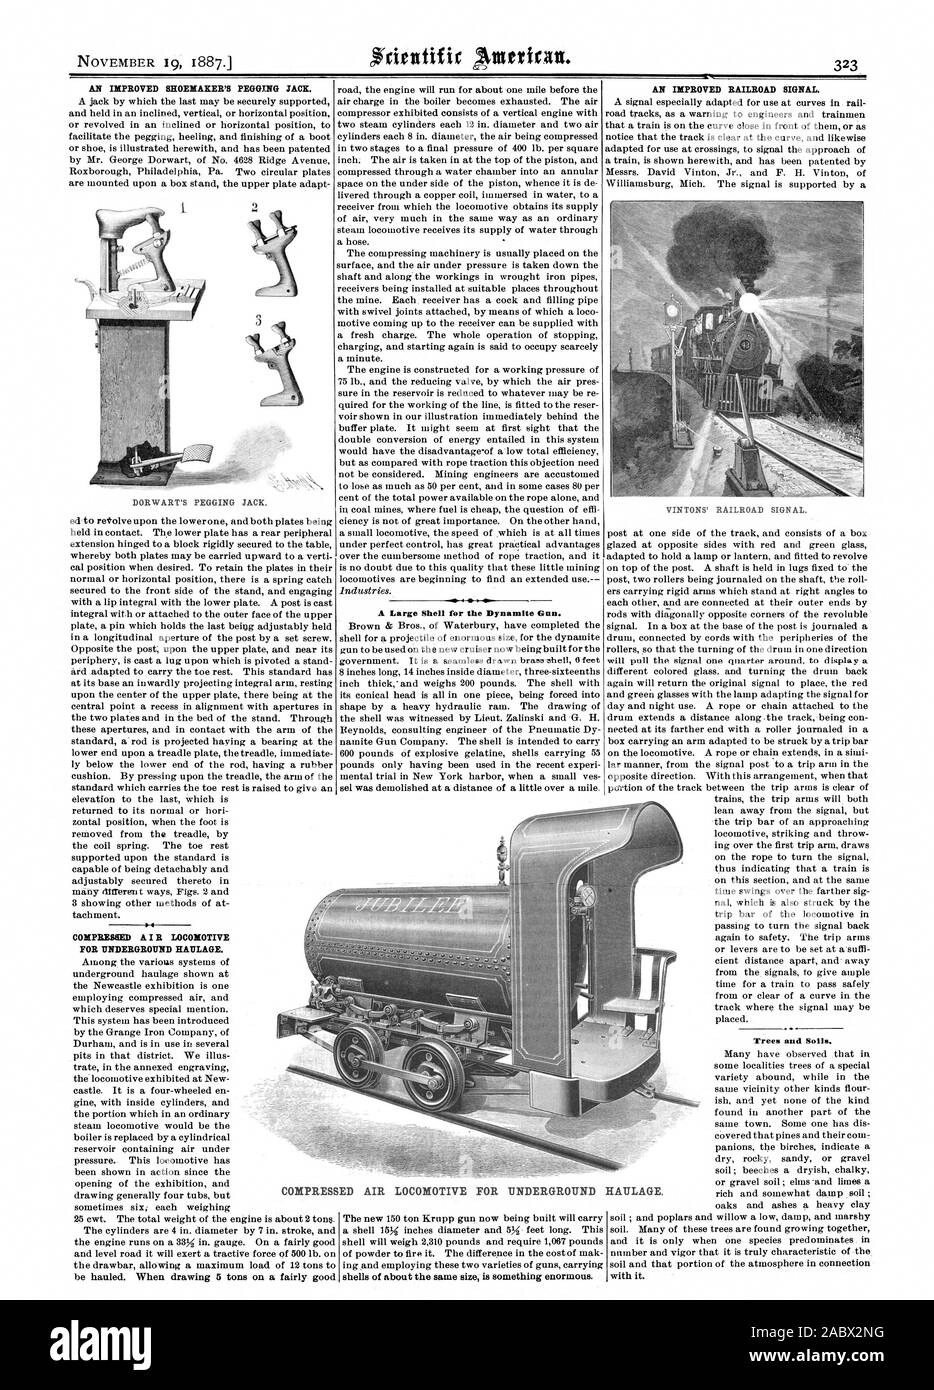 AN IMPROVED SHOEMAKER'S PEGGING JACK. COMPRESSED A I R LOCOMOTIVE FOR UNDERGROUND HAULAGE. sw  ss A Large Shell for the Dynamite Gun. AN IMPROVED RAILROAD SIGNAL. Trees and Soils. COMPRESSED AIR LOCOMOTIVE FOR UNDERGROUND HAULAGE., scientific american, 1887-11-19 Stock Photo